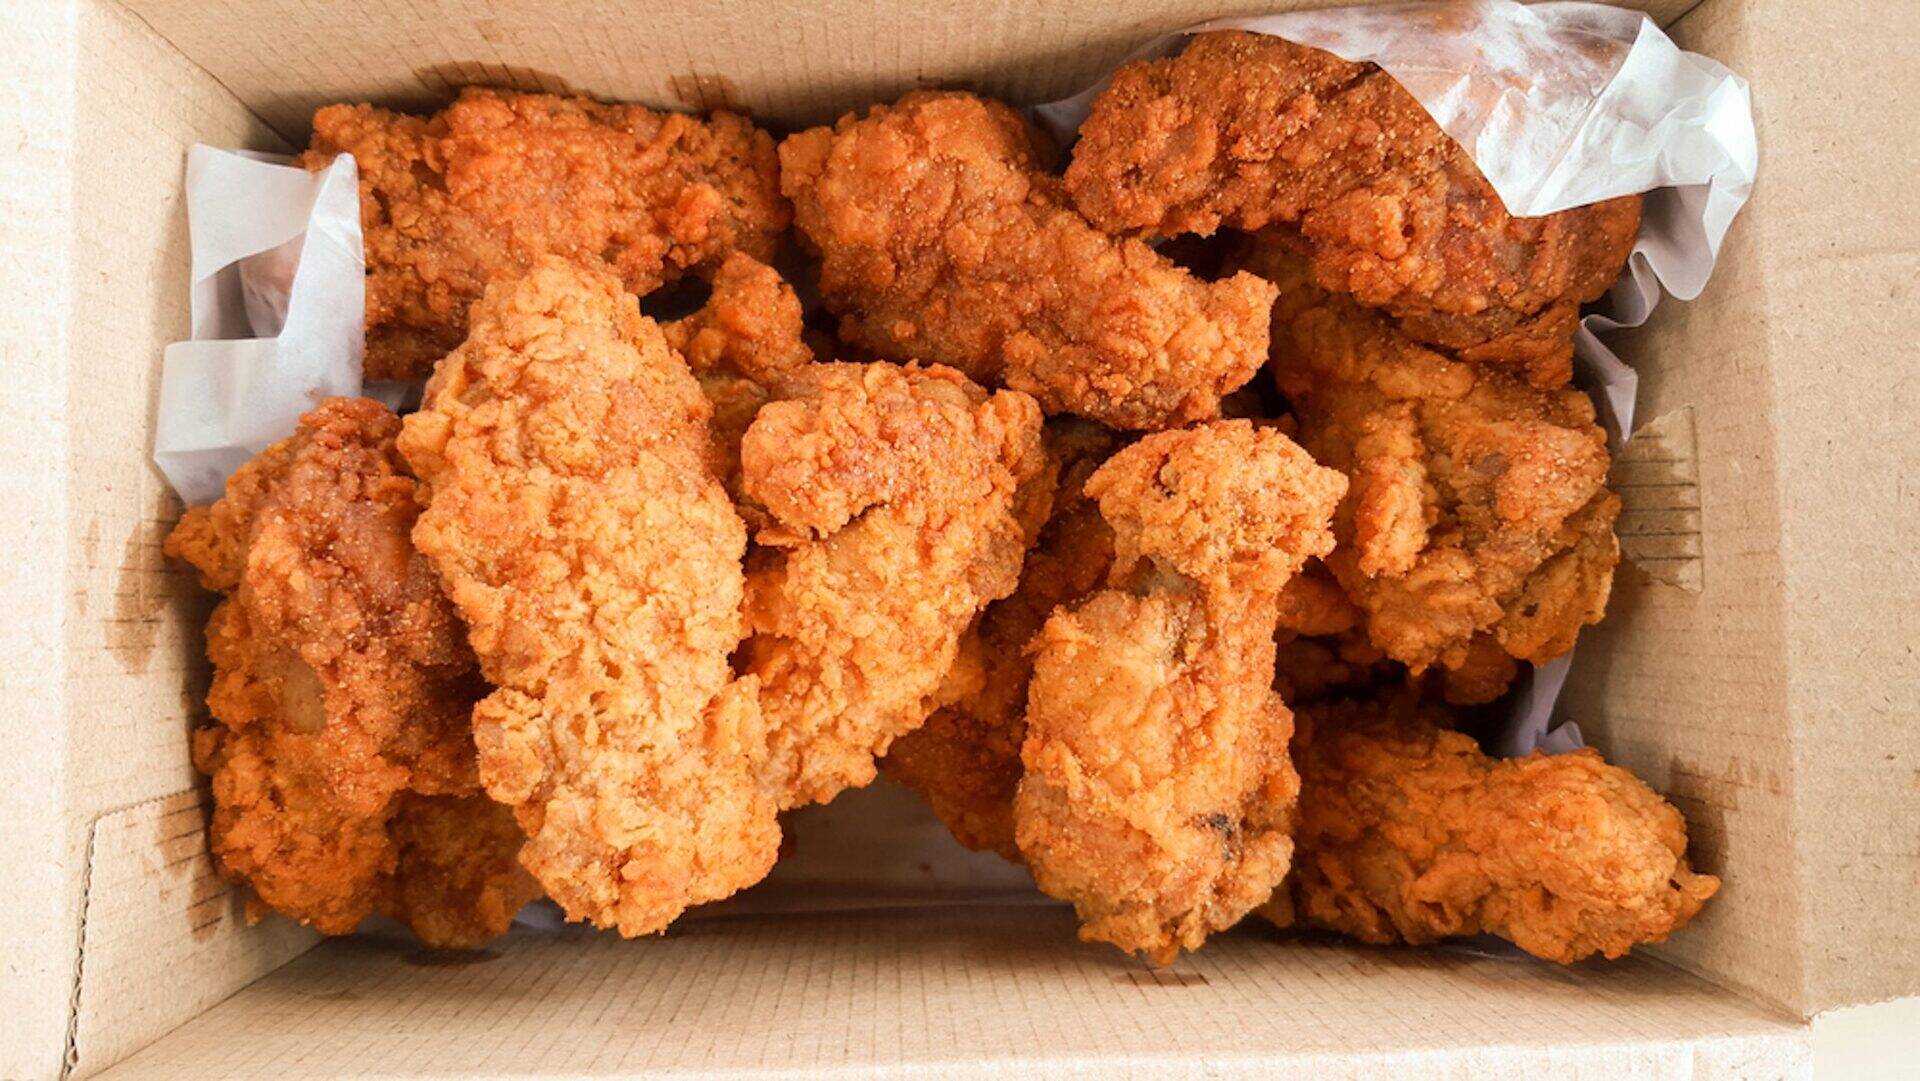 How To Store Fried Chicken To Keep It Crispy | Storables